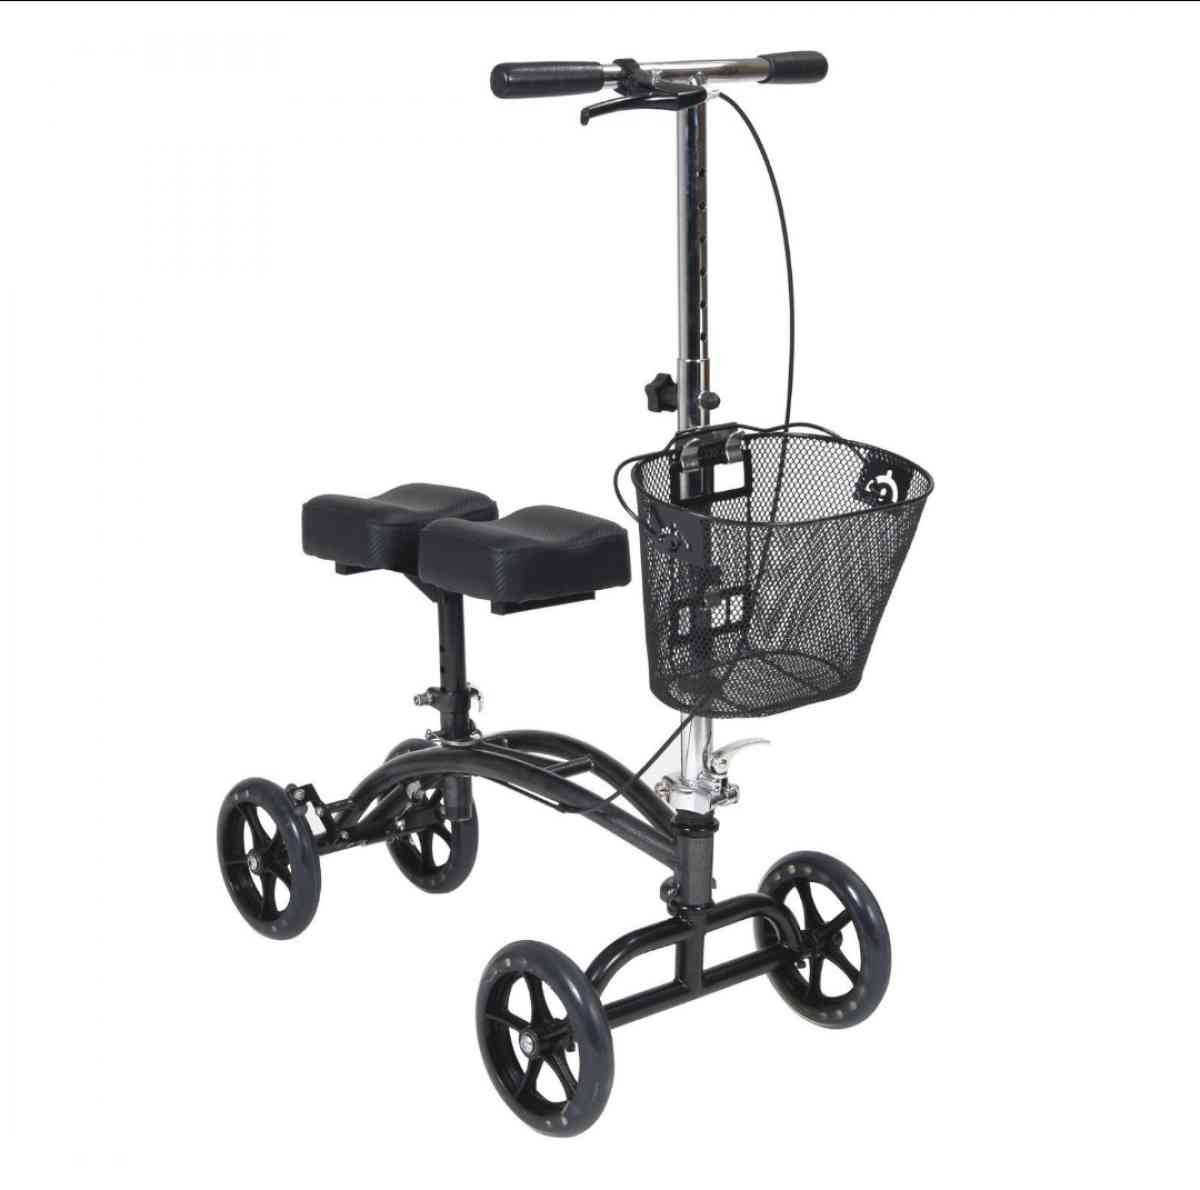 Equate Steerable Knee Scooter